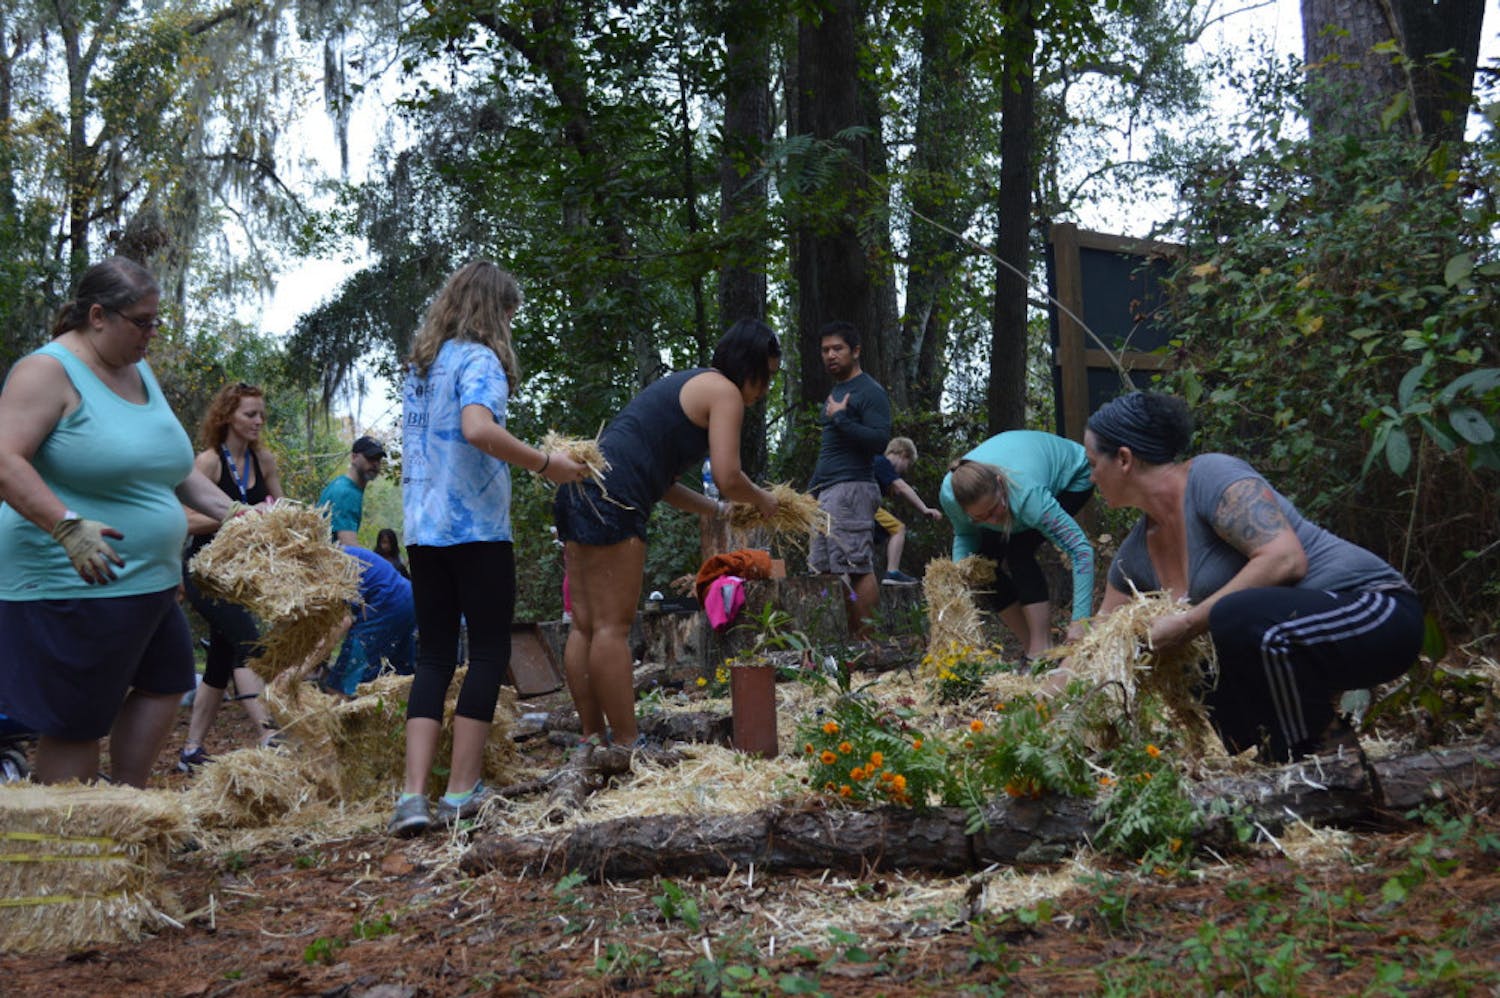 Volunteers spread hay after planting marigolds, milkweed and other perennials beside an outdoor classroom at Stephen Foster Elementary School. They took the day to beautify the campus in the wake of media specialist Leslie Williams’ death. Gillian Sweeney / Alligator Staff
&nbsp;